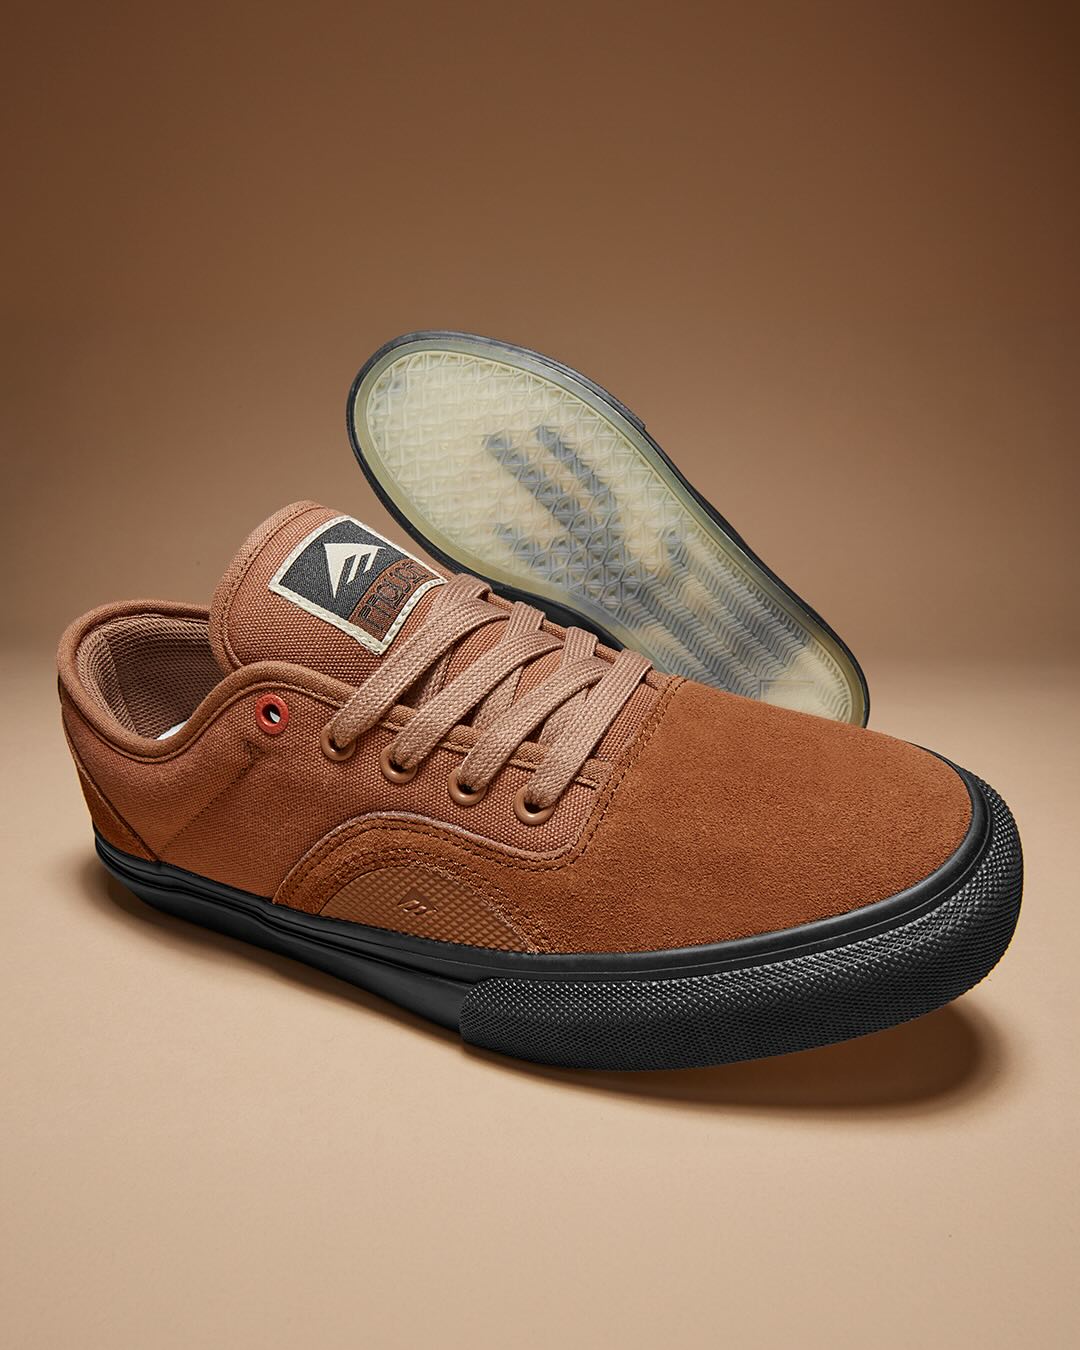 Introducing the Jess Mudgett X Emerica collection